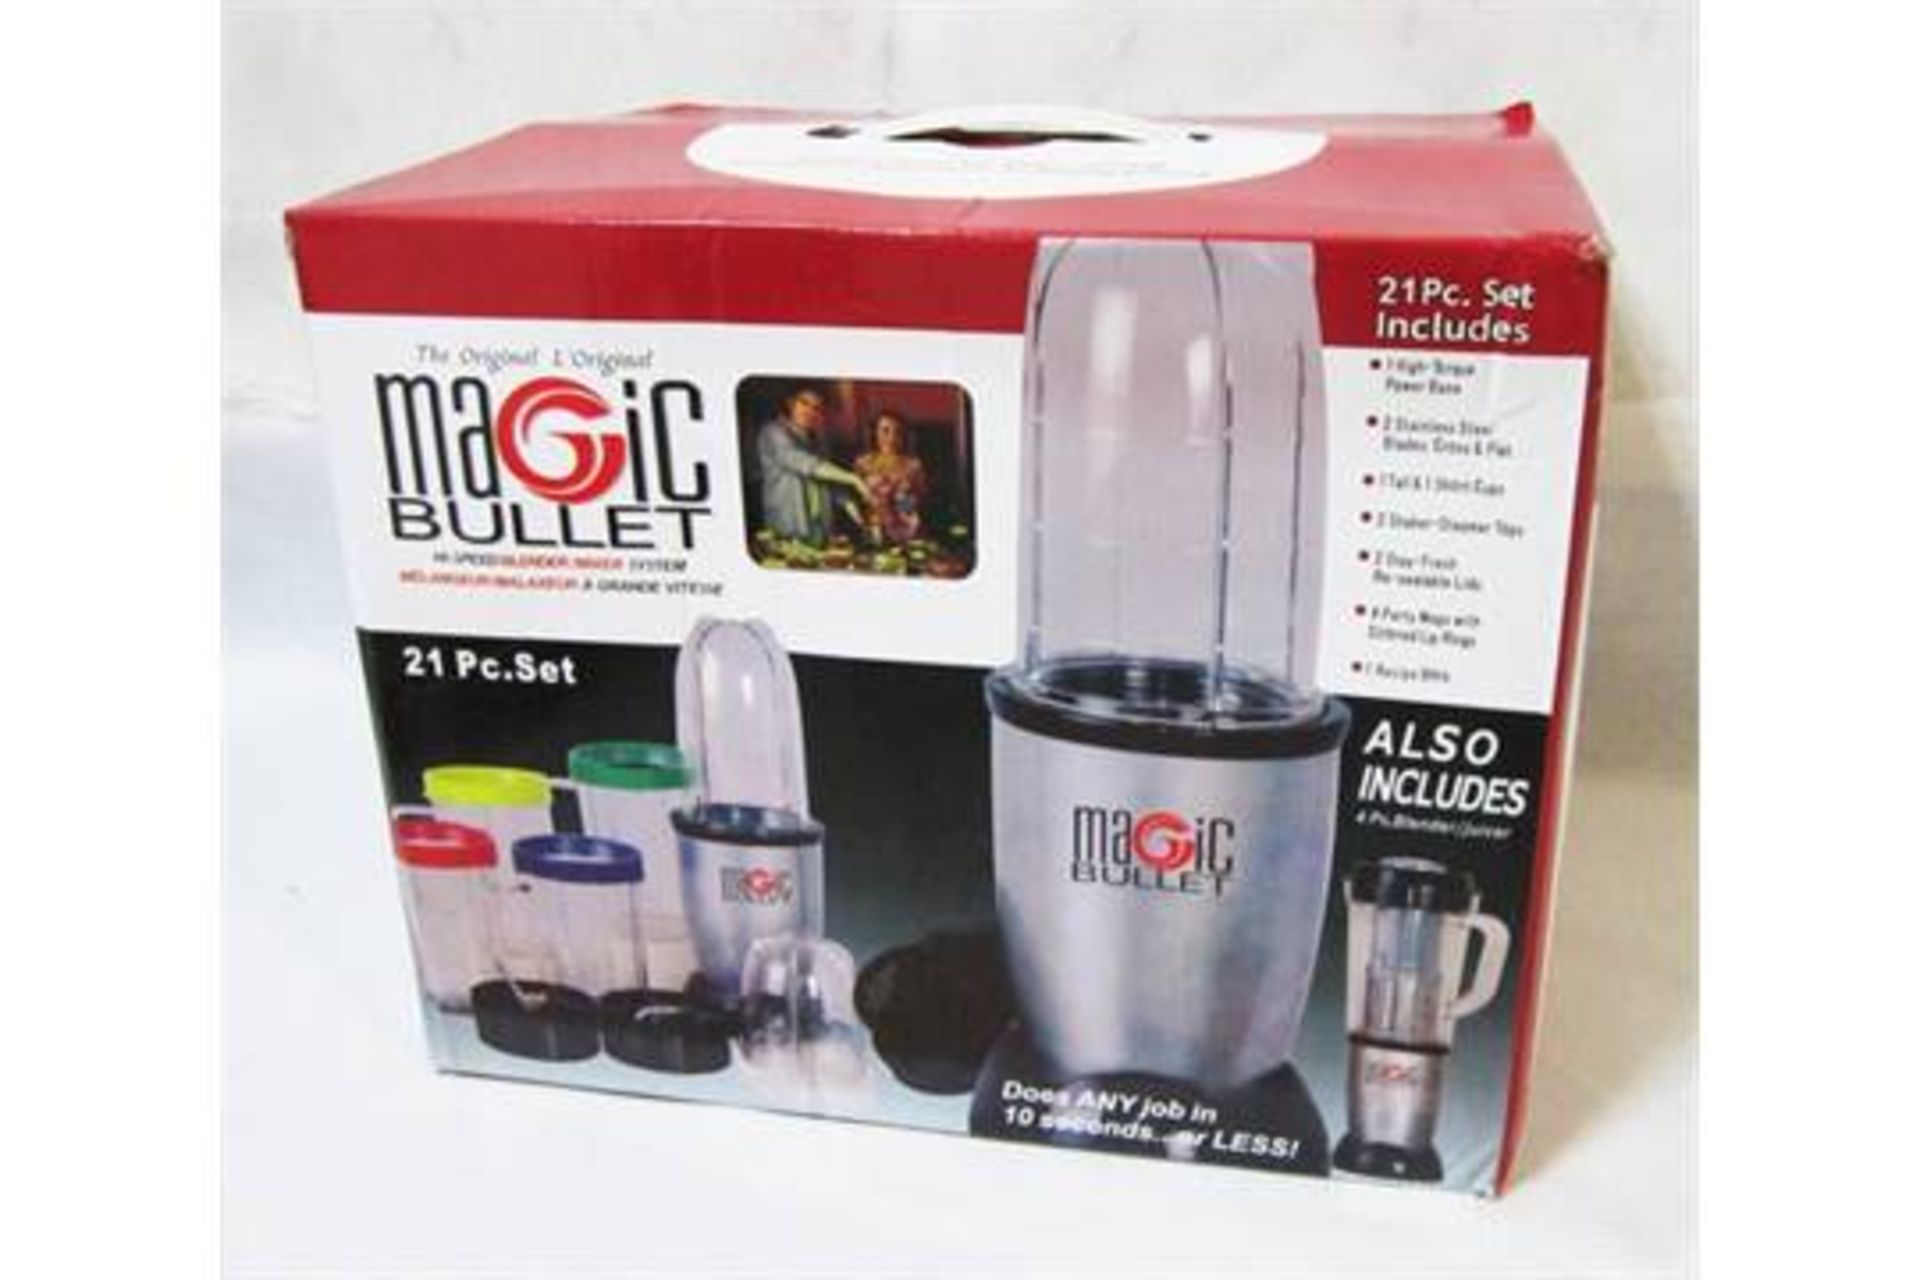 BOXED BRAND NEW AND SEALED MAGIC BULLET 21 PIECE MULTI FUNCTION JUICER BLENDING MACHINE (TWT214)